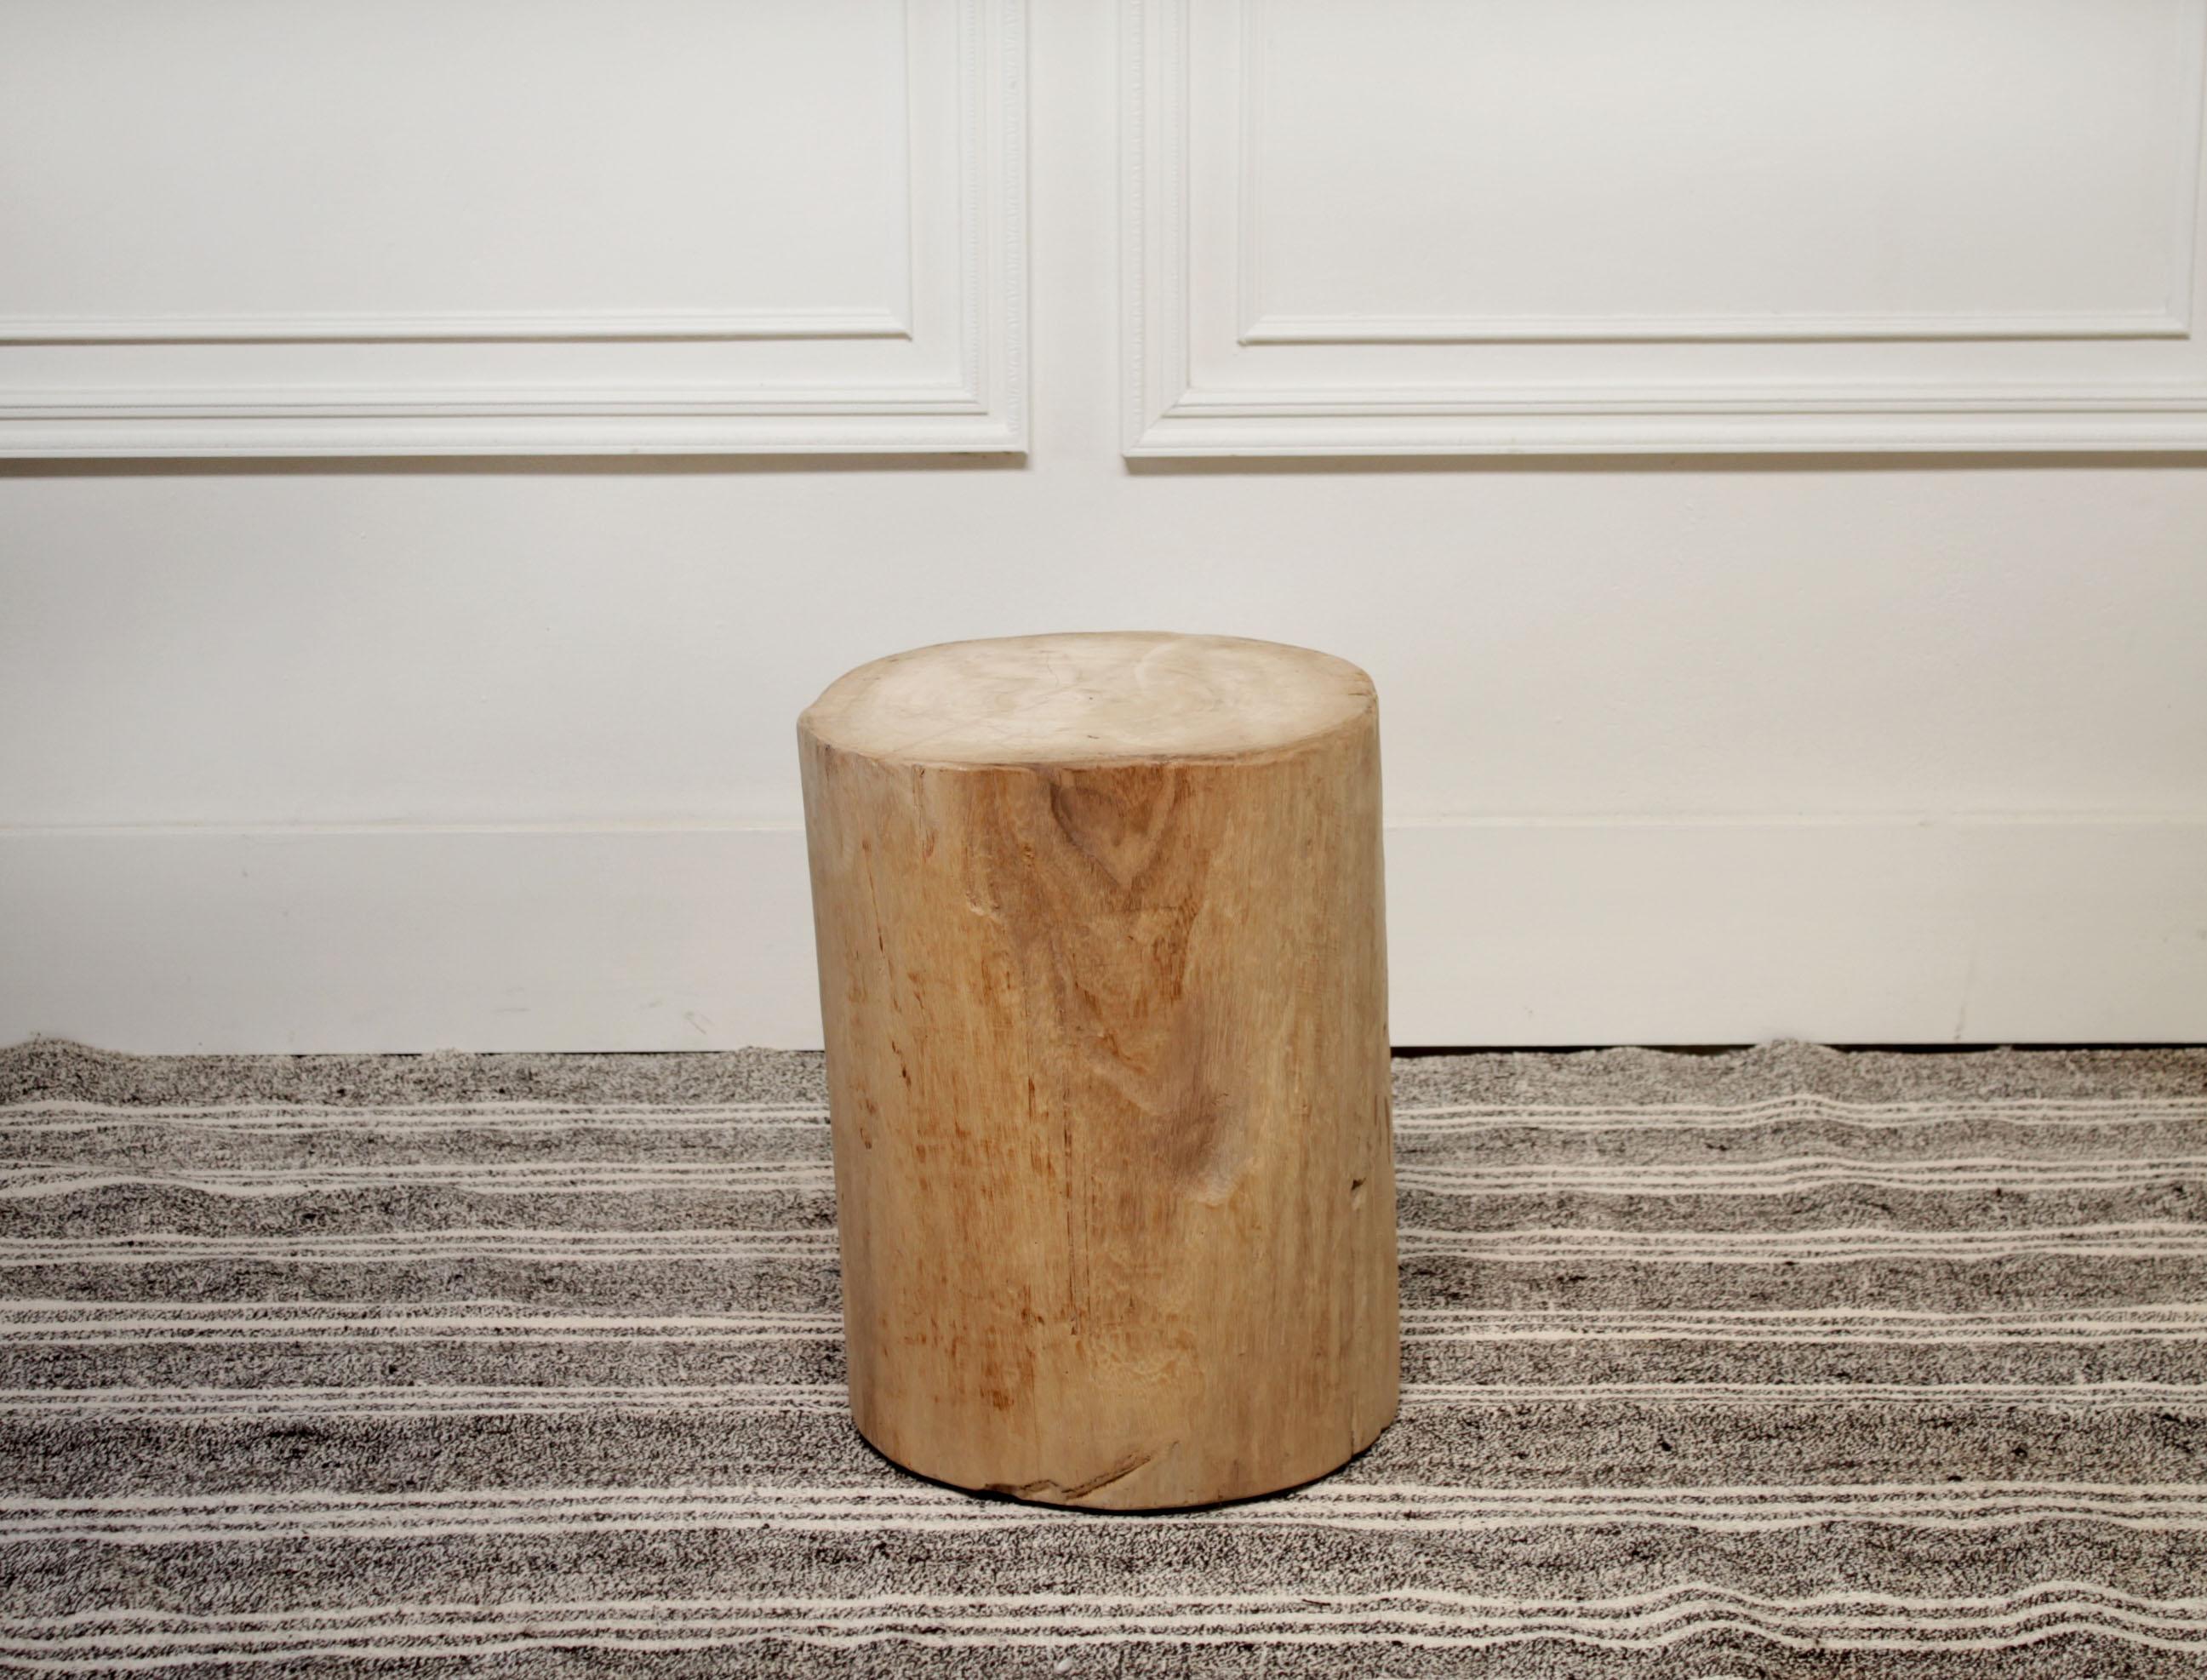 Birch wood tree stump base for side table or stool beautiful smooth top with rustic sides, these are great for a side table or can be used for seating in any room. These are raw wood, they do not have any finish, or coloring.
Measures: 17.5